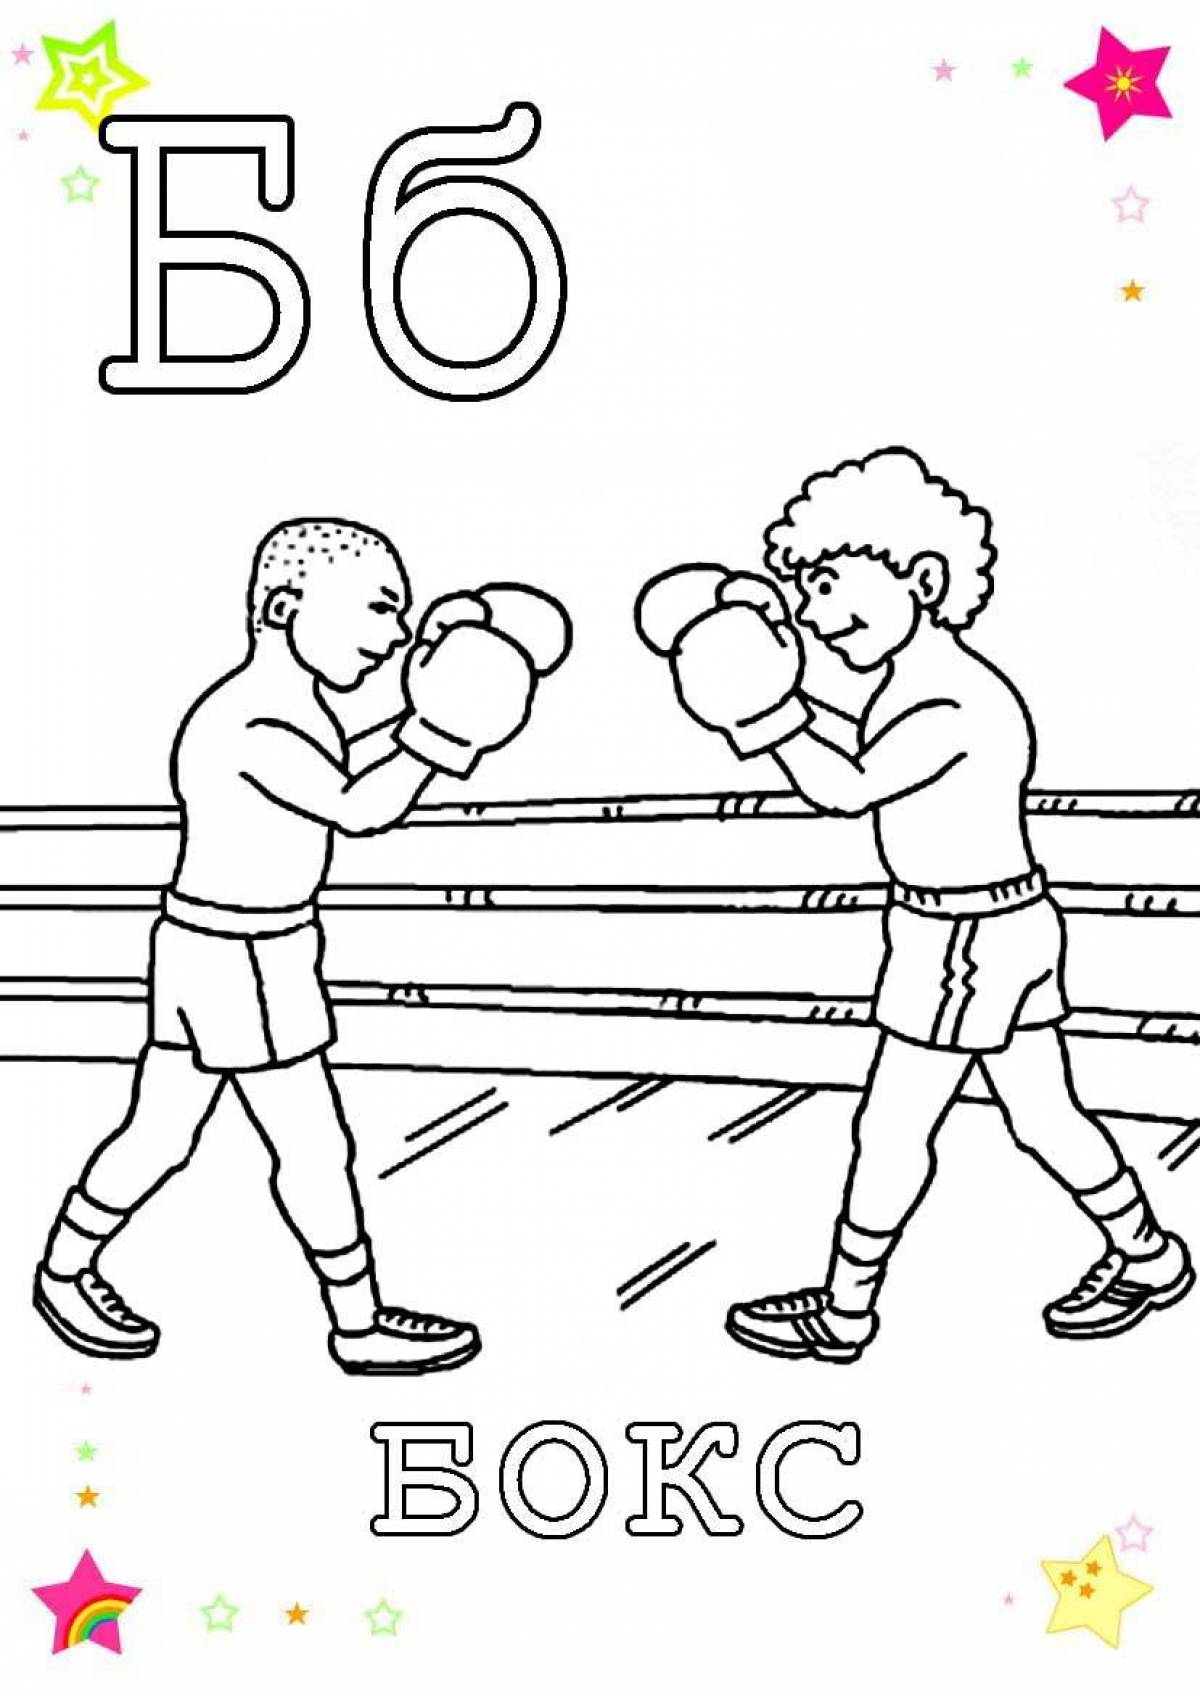 Exciting boxing and boo coloring